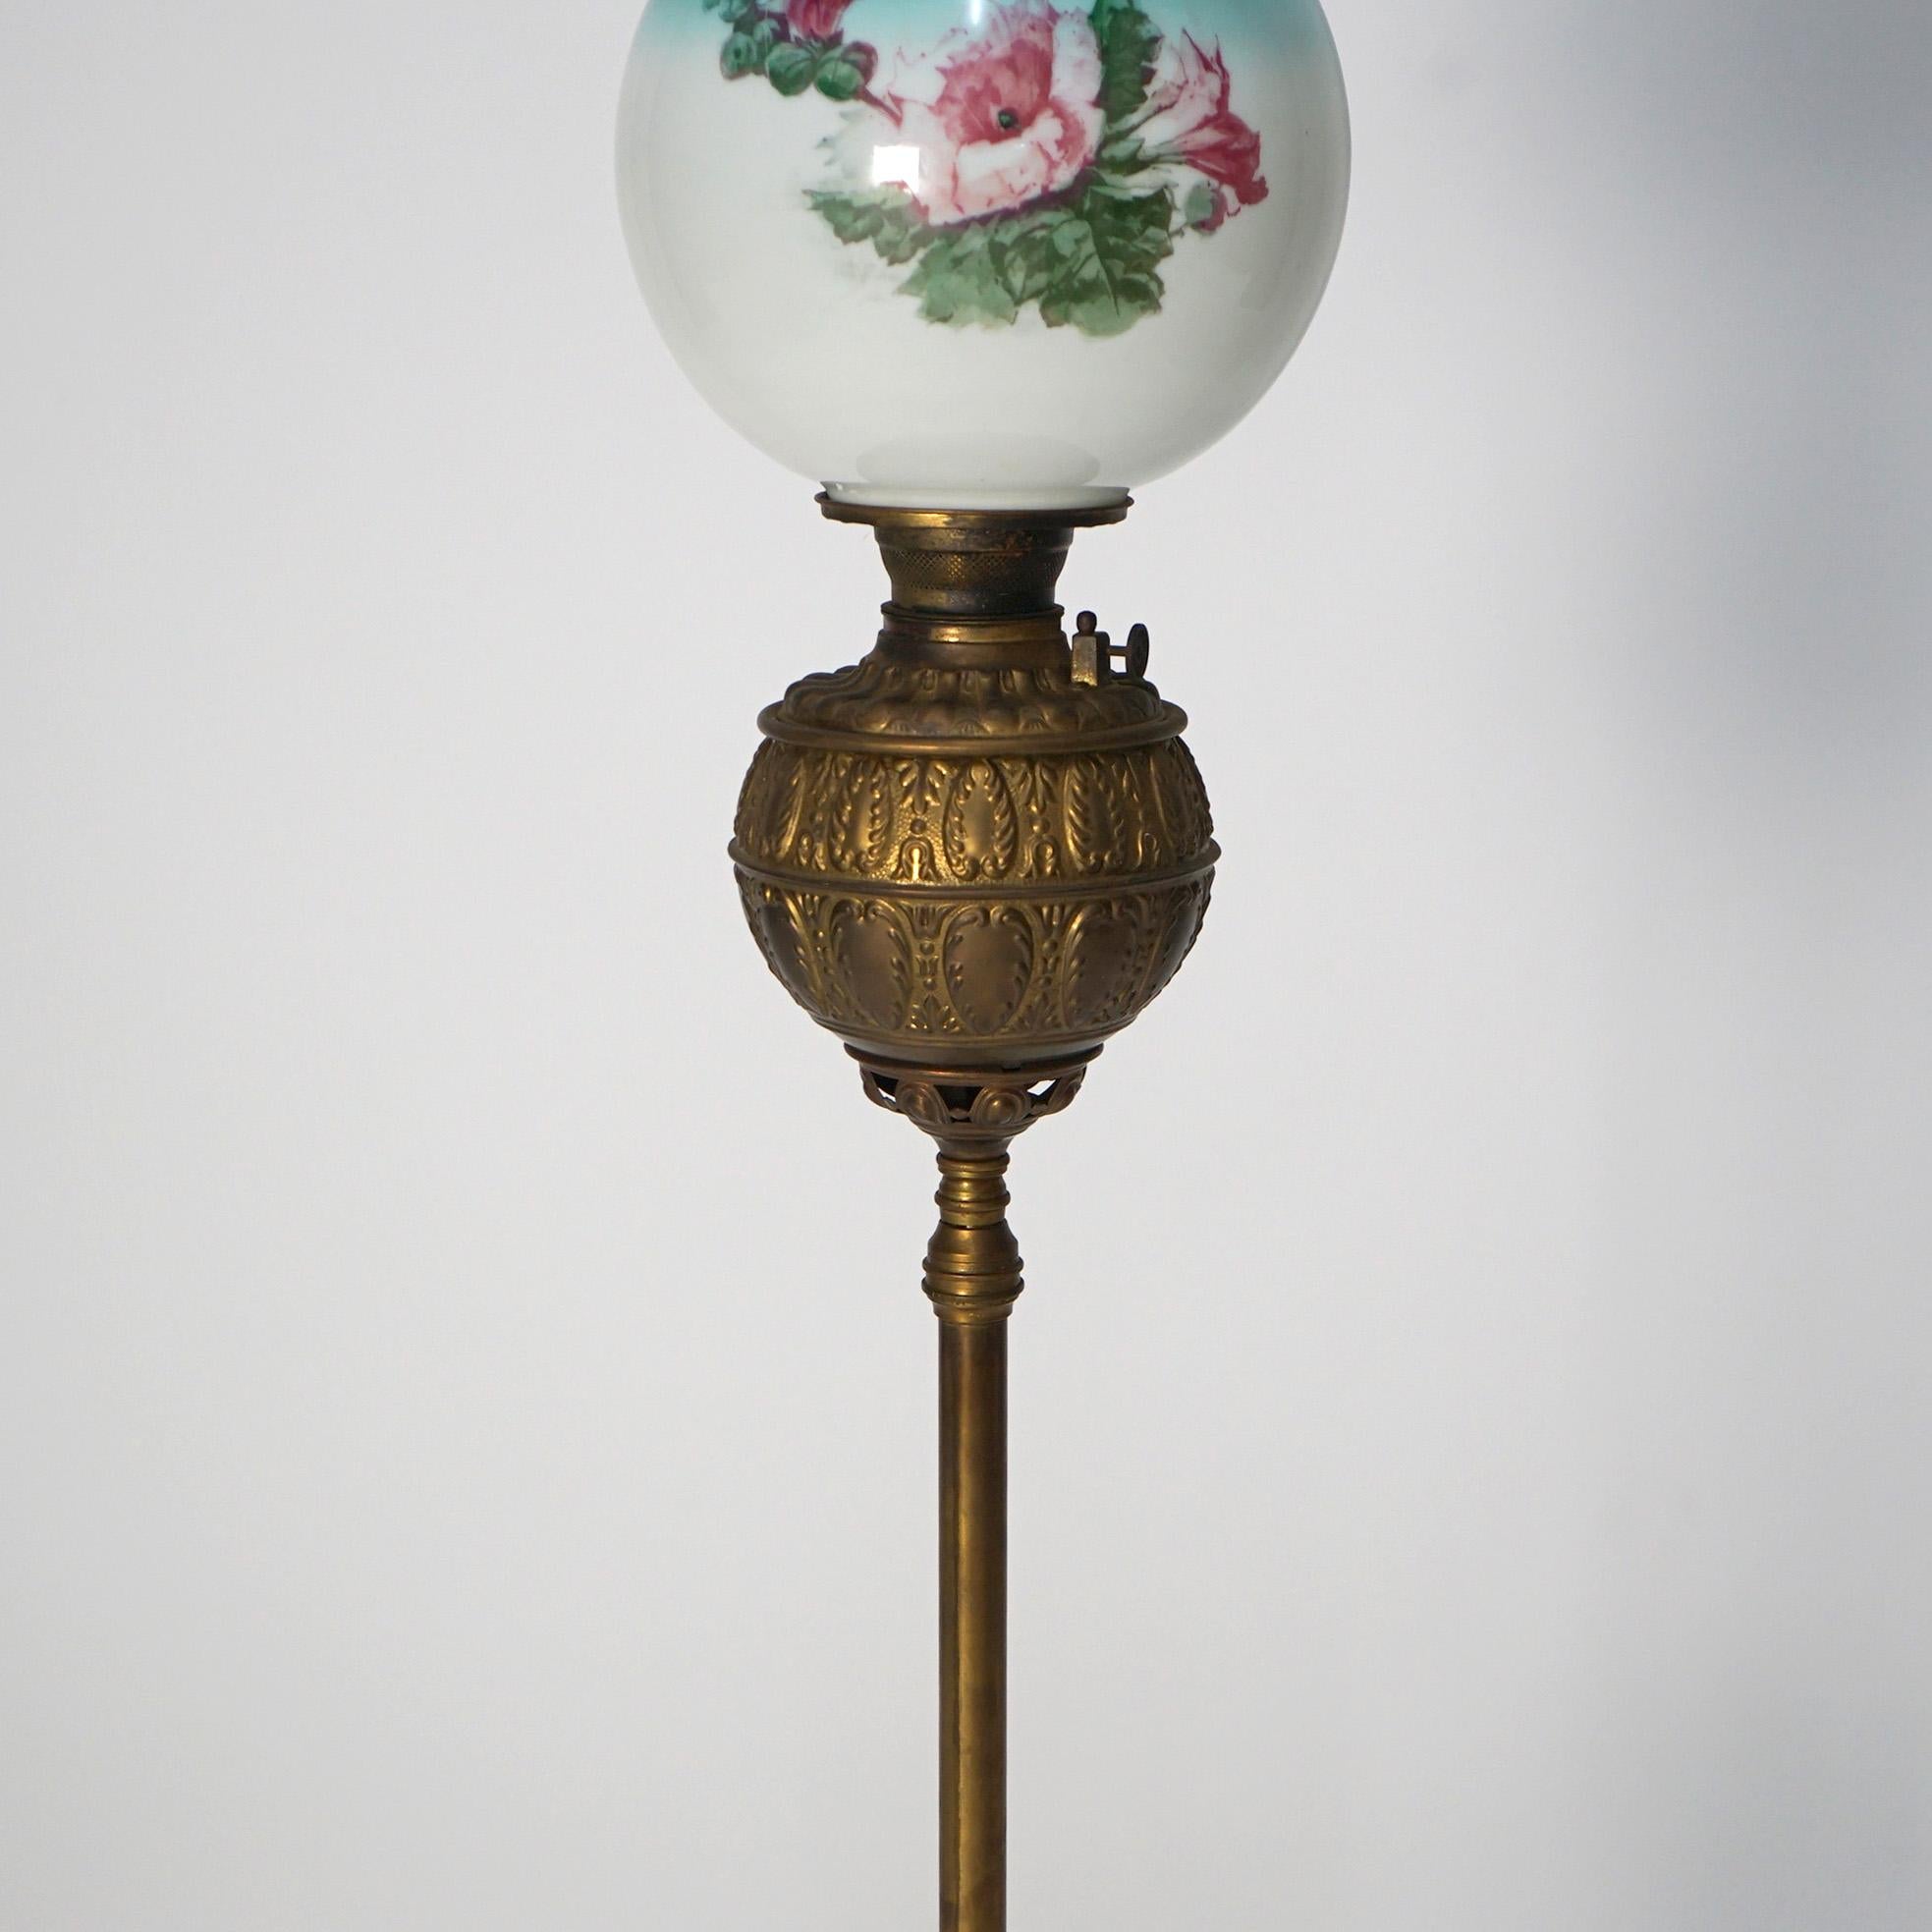 Victorian Antique Brass Telescoping Piano Oil Lamp & Hand Painted Floral Shade c1890 For Sale